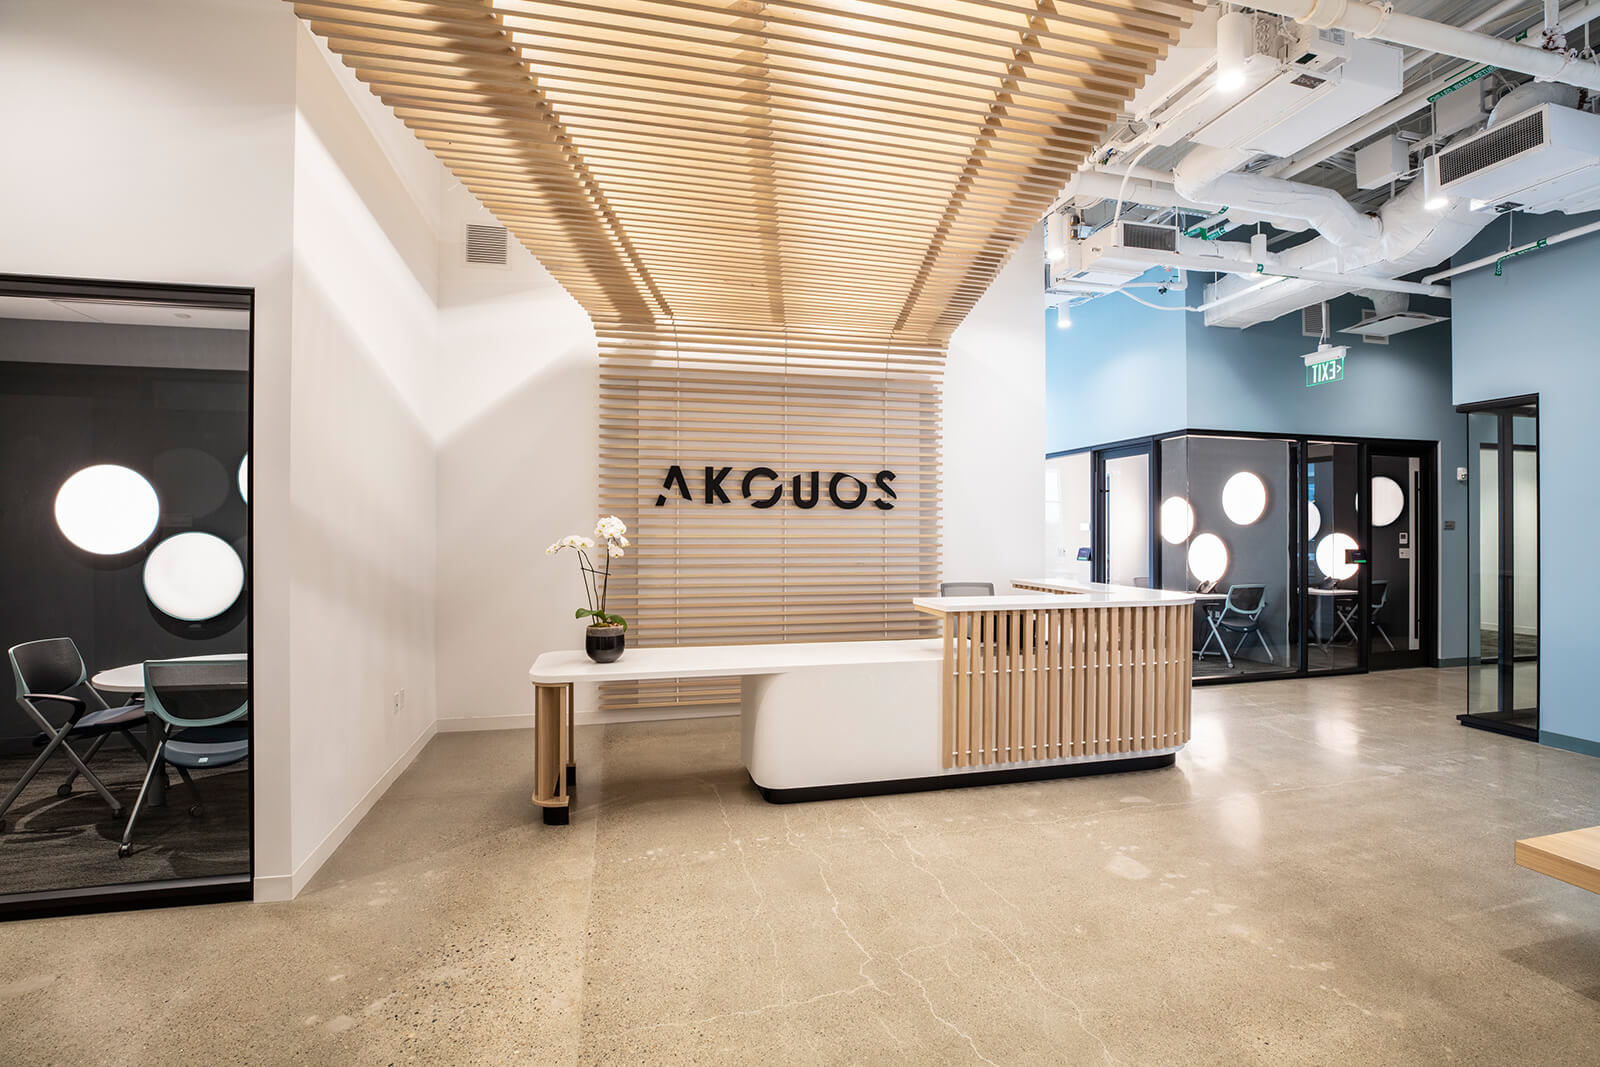 design build services firm for akouos therapeutics 1